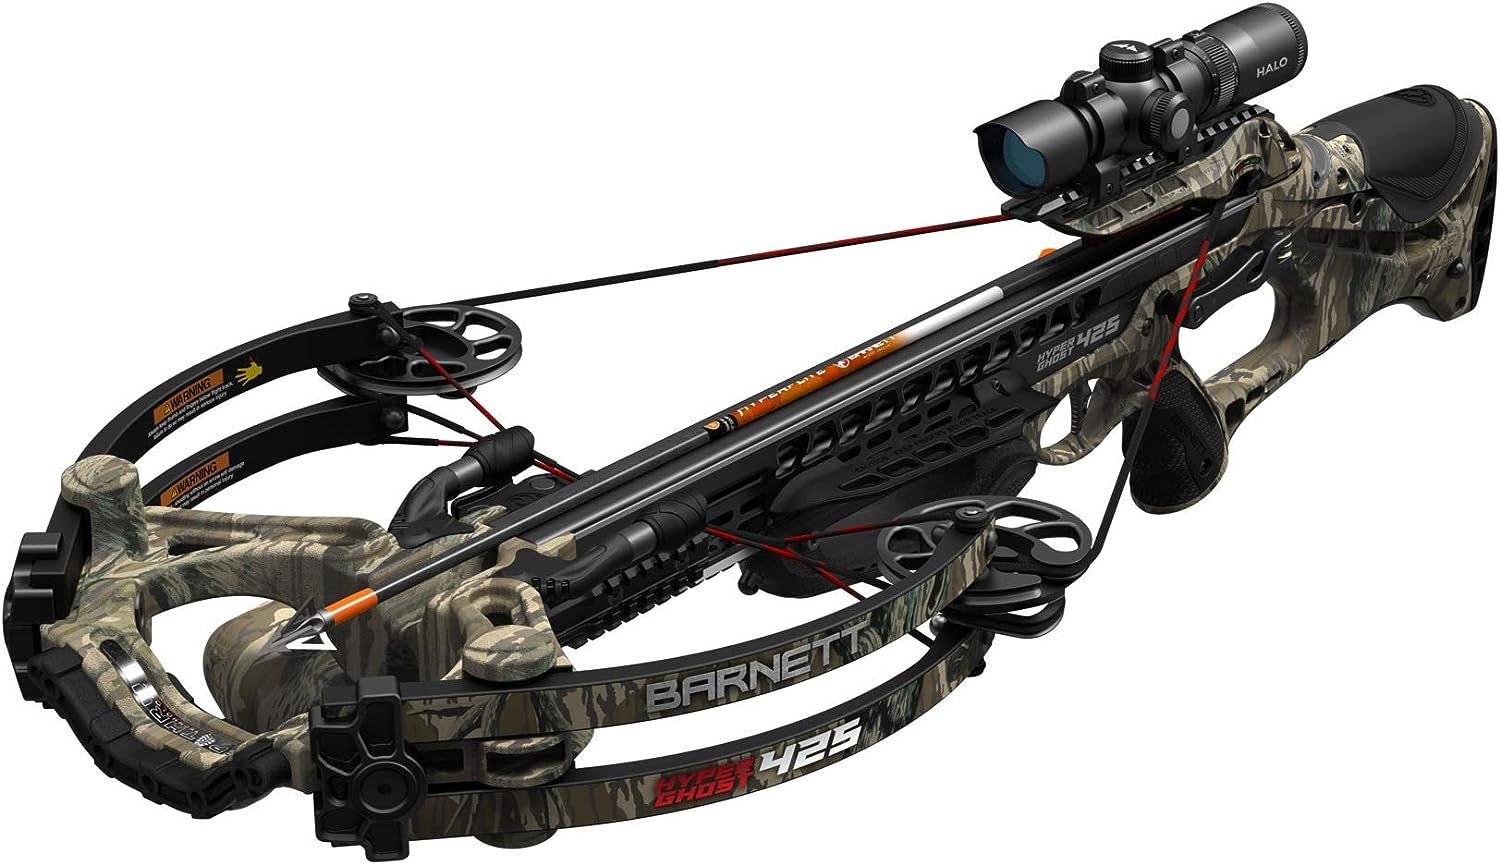 Barnett HyperGhost 425 Crossbow in Mossy Oak Treestand Camo, Shoots 425 Feet Per Second and Includes Premium Illuminated 1.5 5x32 Scope